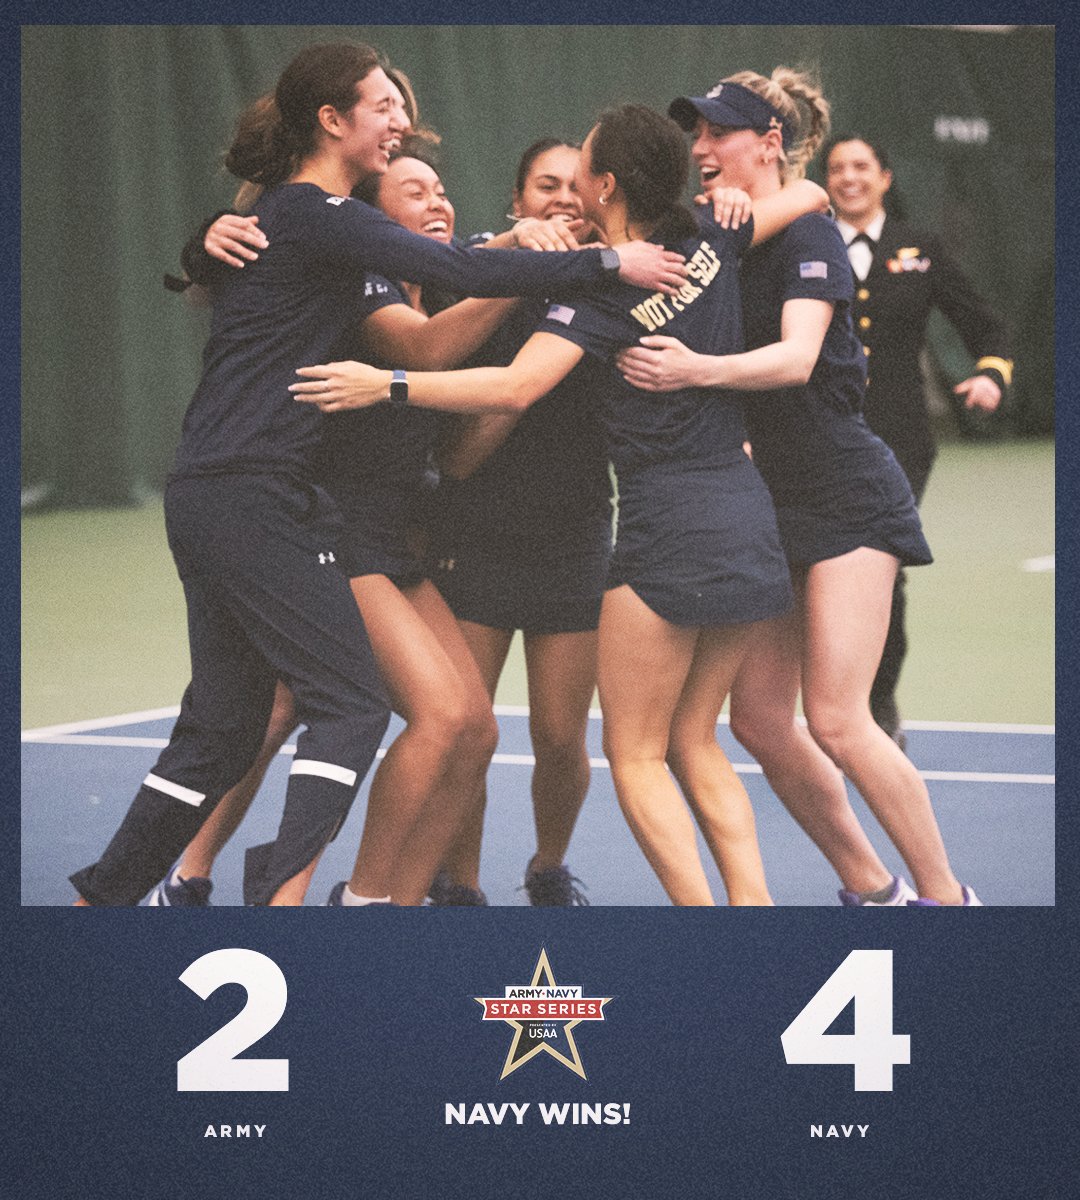 .@NavyWTennis captures the ⭐️ on their home court! #ArmyNavy